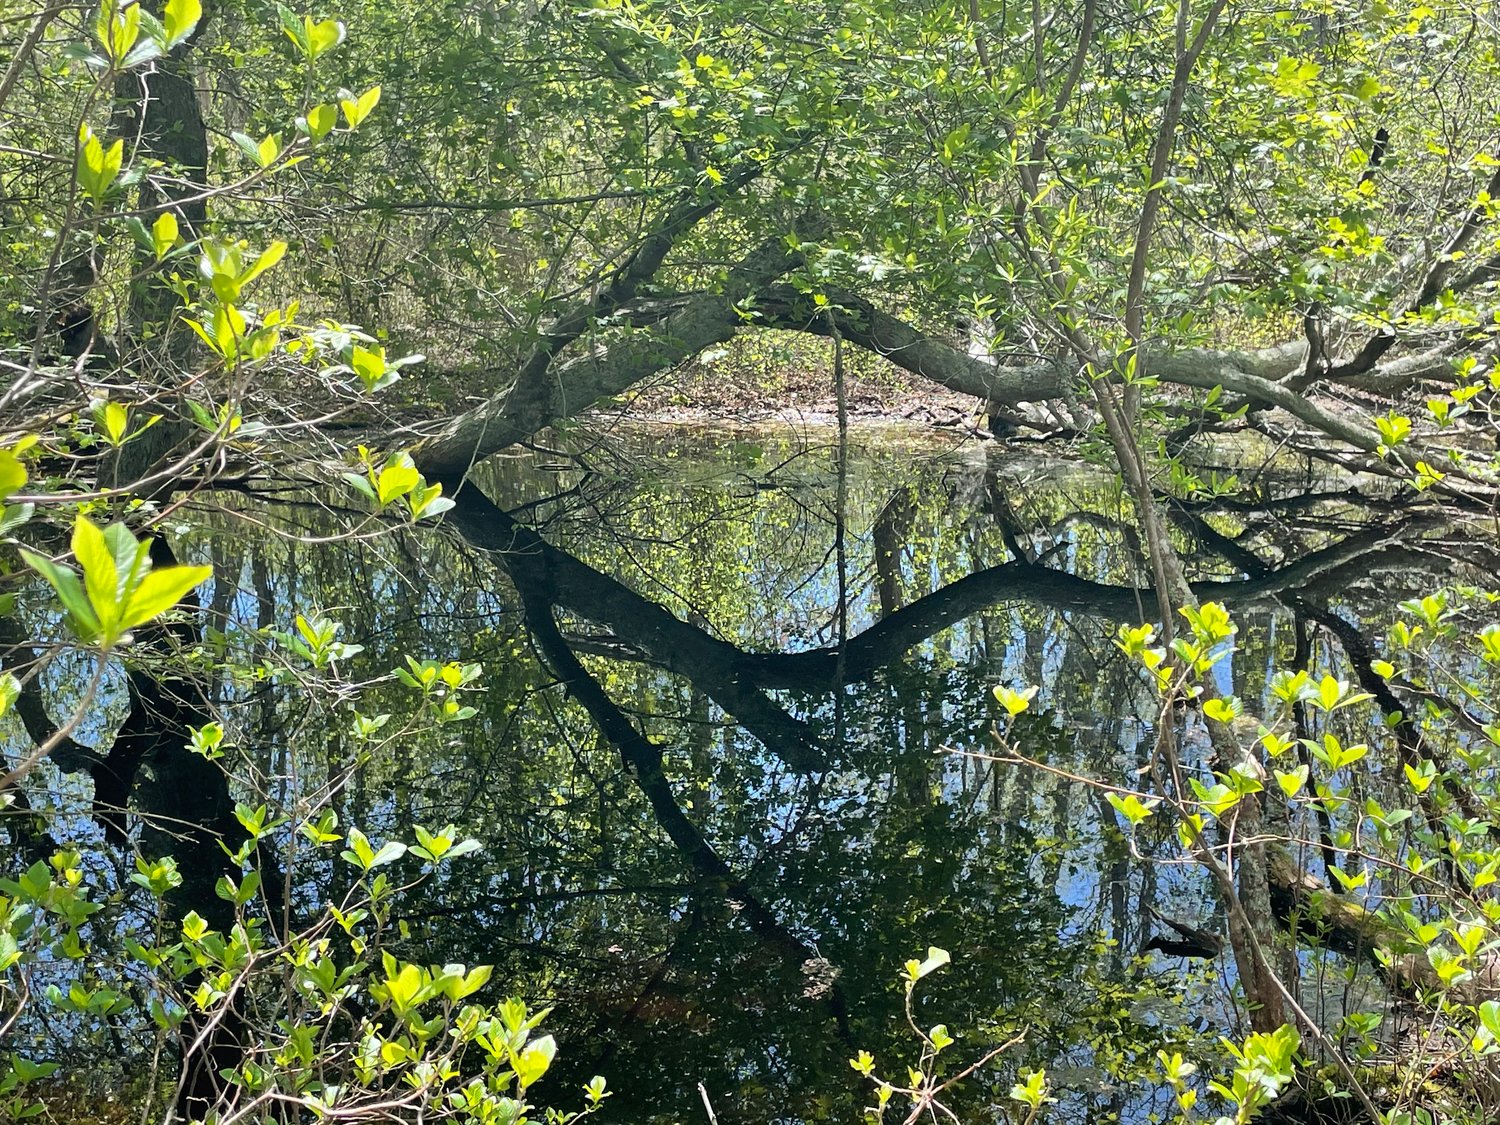 Branches and leaves reflect off the surface of a vernal pool in Squam Swamp May 19.